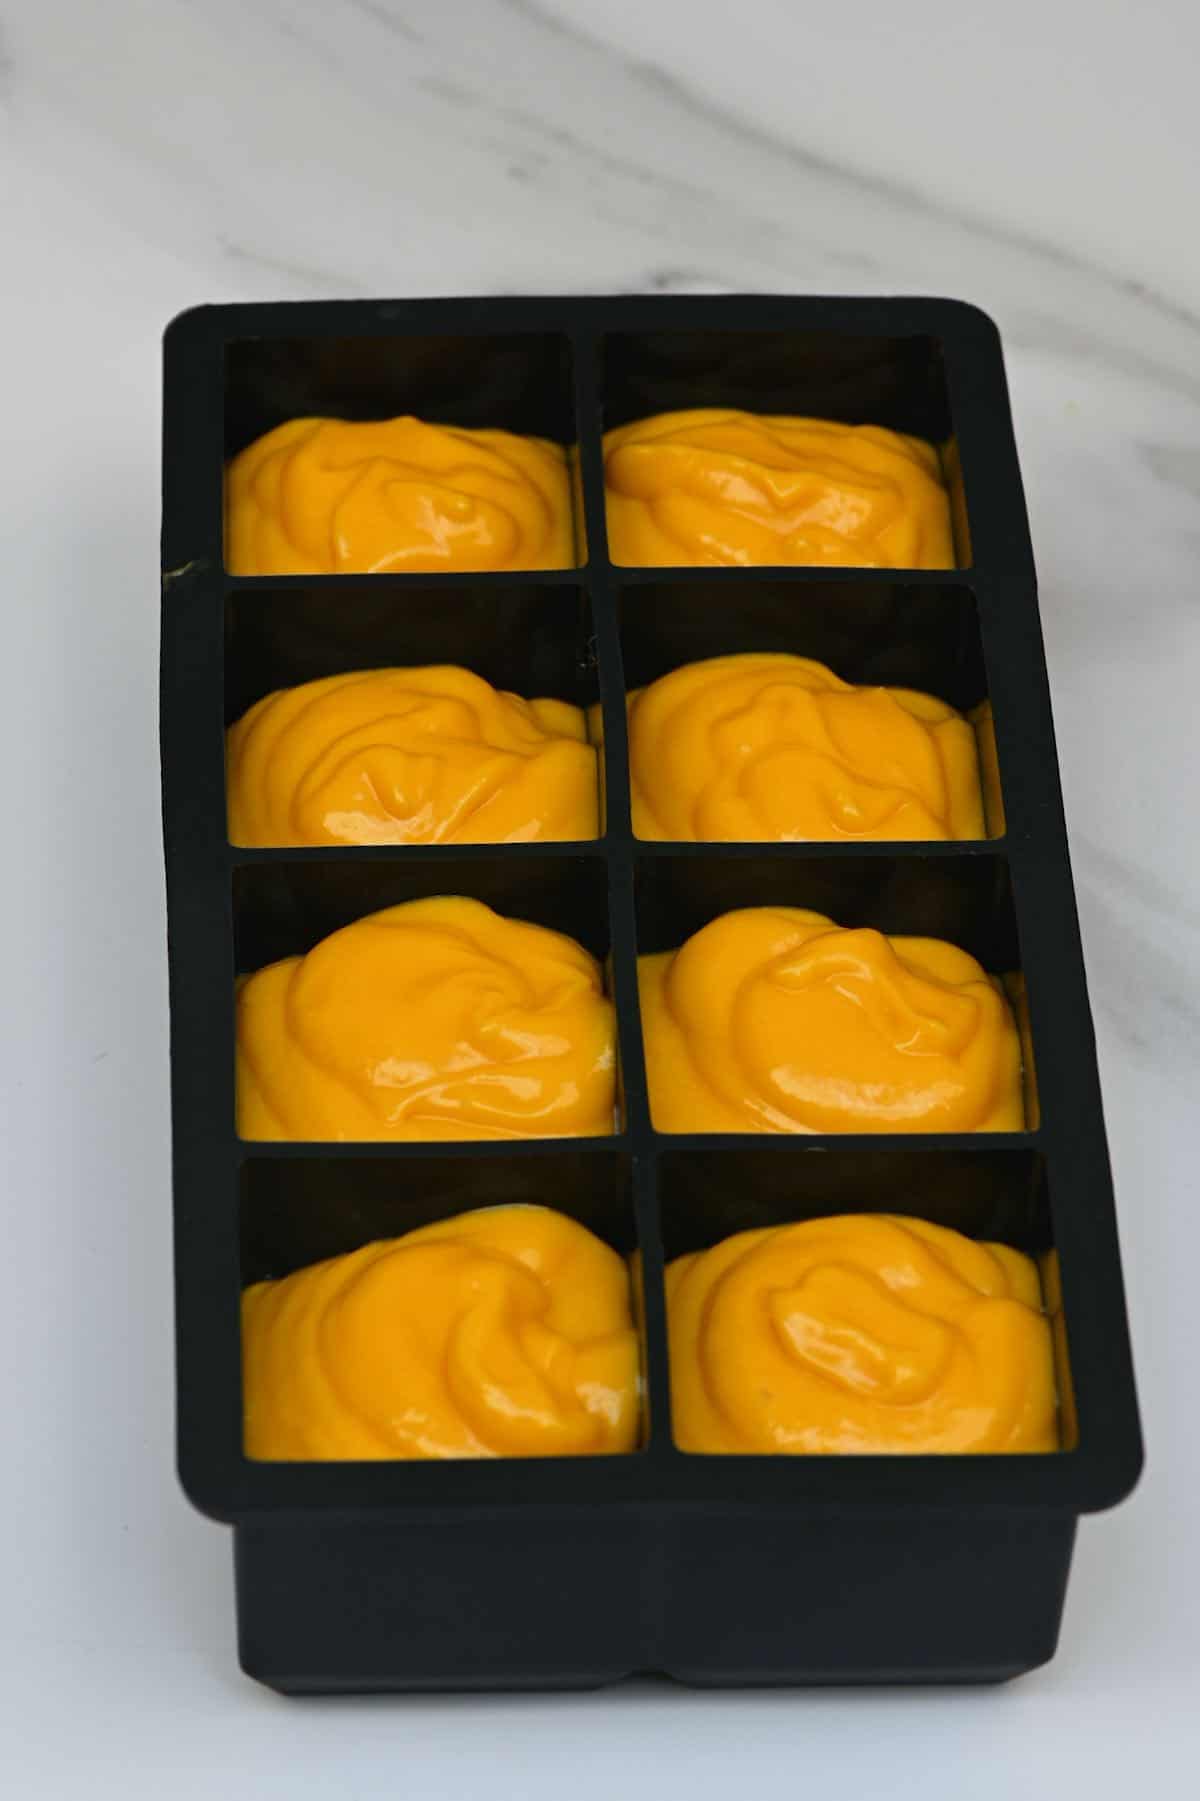 Mango puree places in ice cube tray